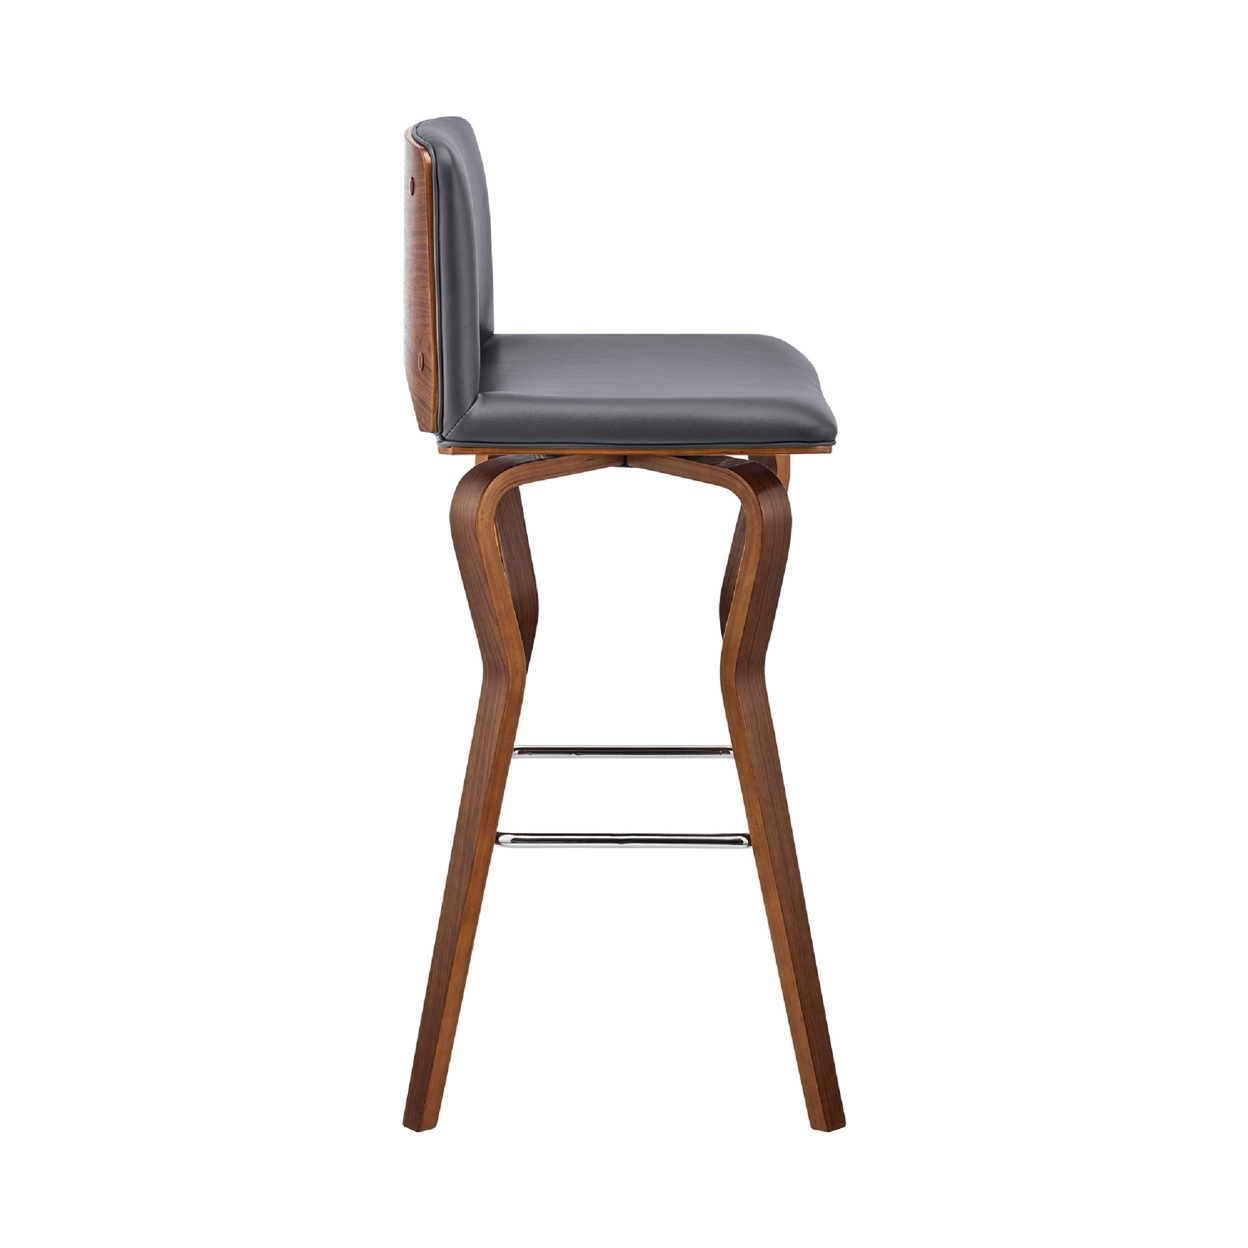 26 Inch Swivel Counter Height Stool With Faux Leather And Wooden Support, Brown And Gray- Saltoro Sherpi